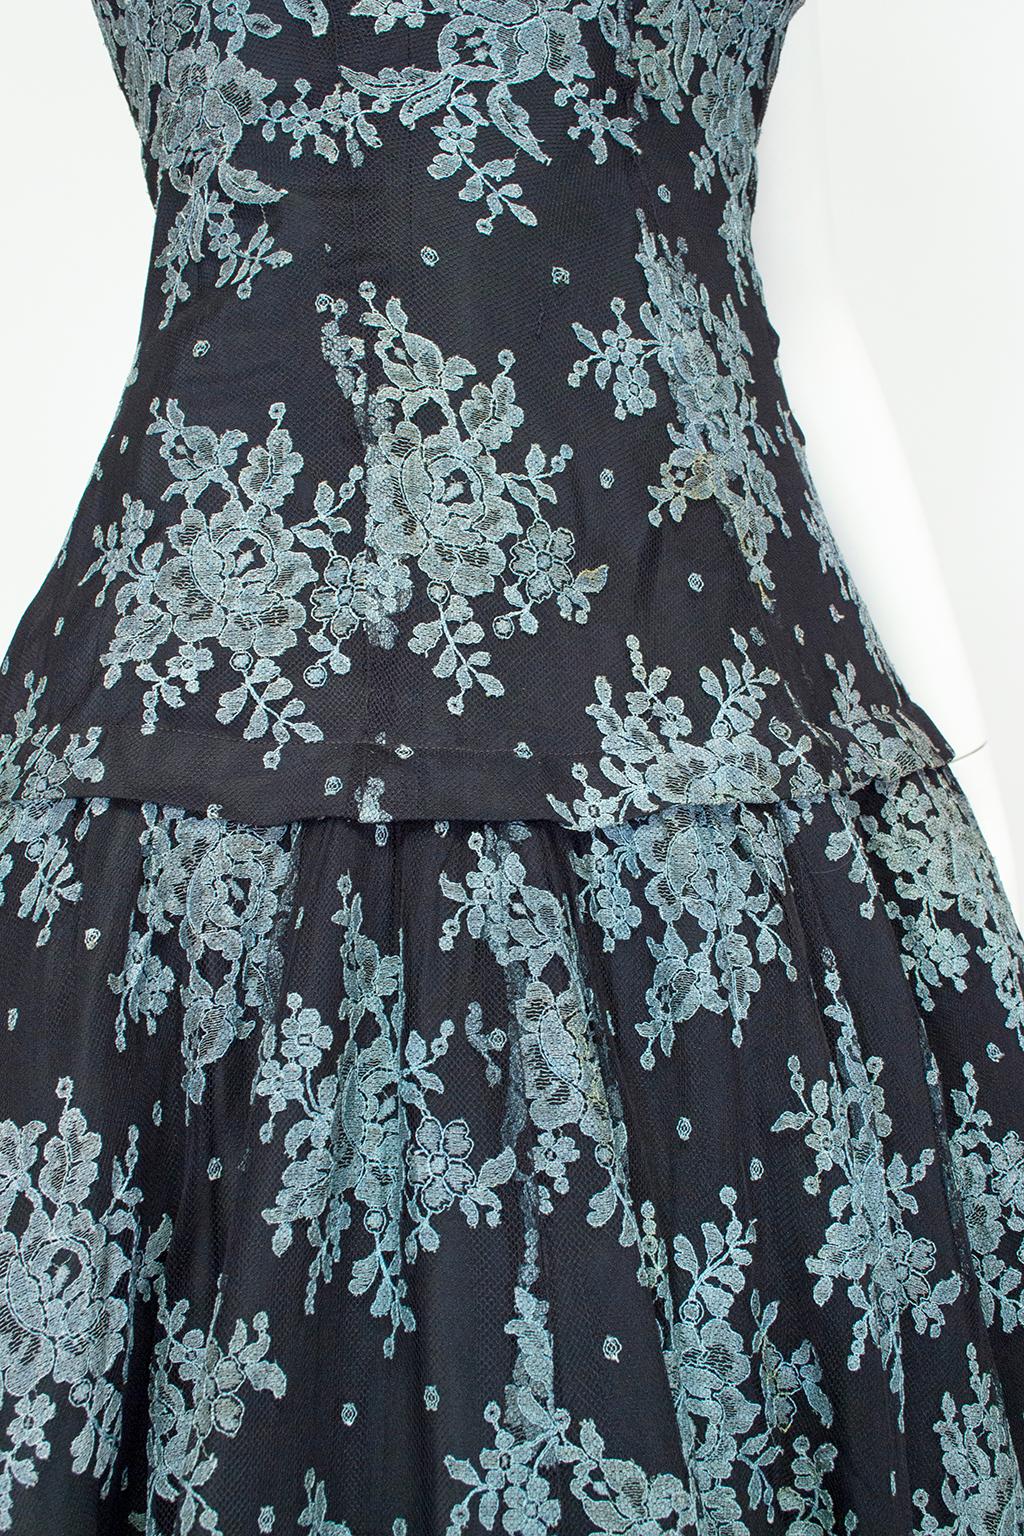 Bespoke Spanish Blue and Black Lace Mantilla Drop Waist Party Dress – XS, 1950s For Sale 4